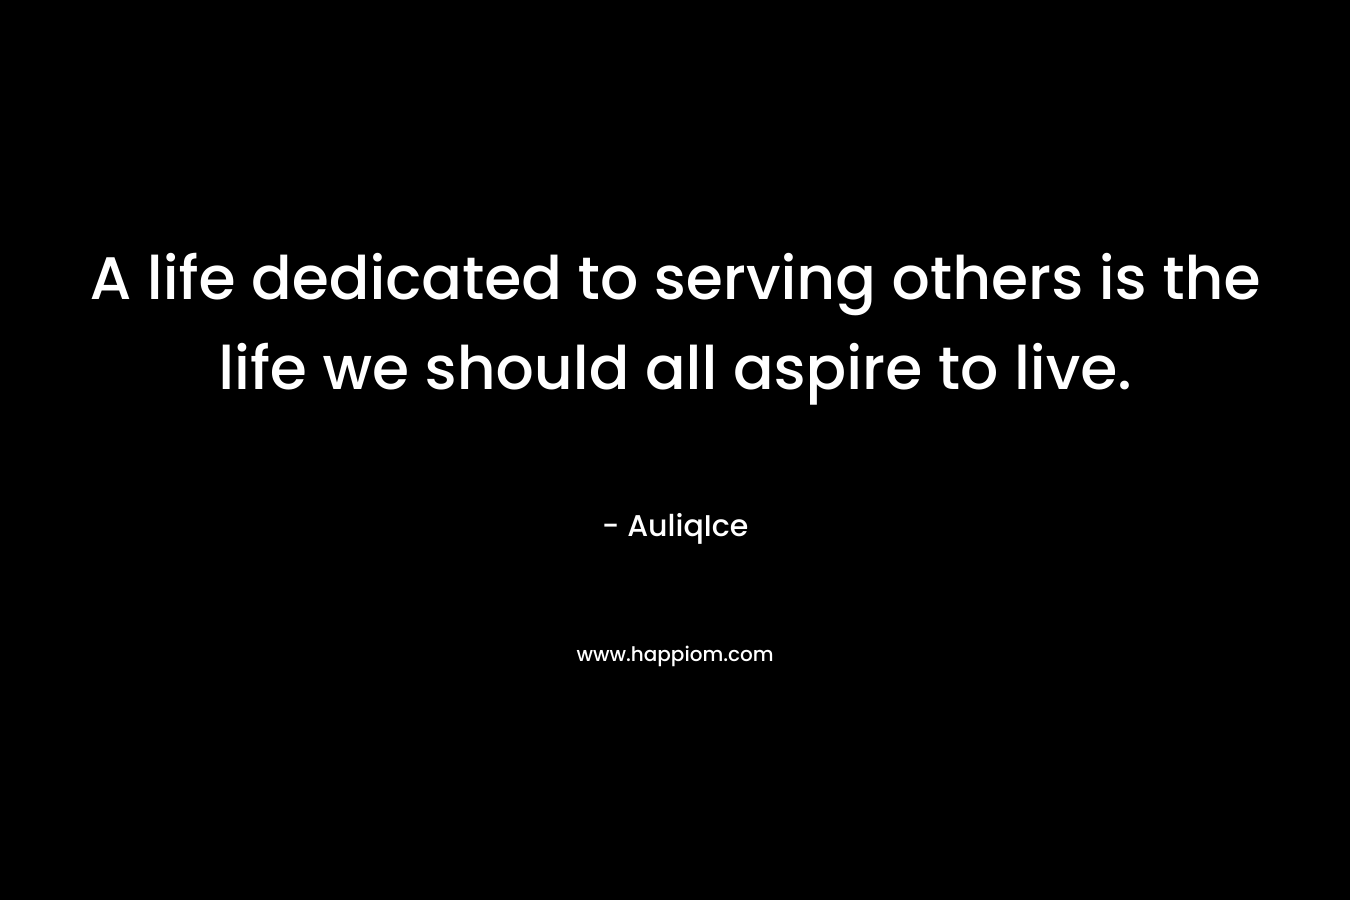 A life dedicated to serving others is the life we should all aspire to live.